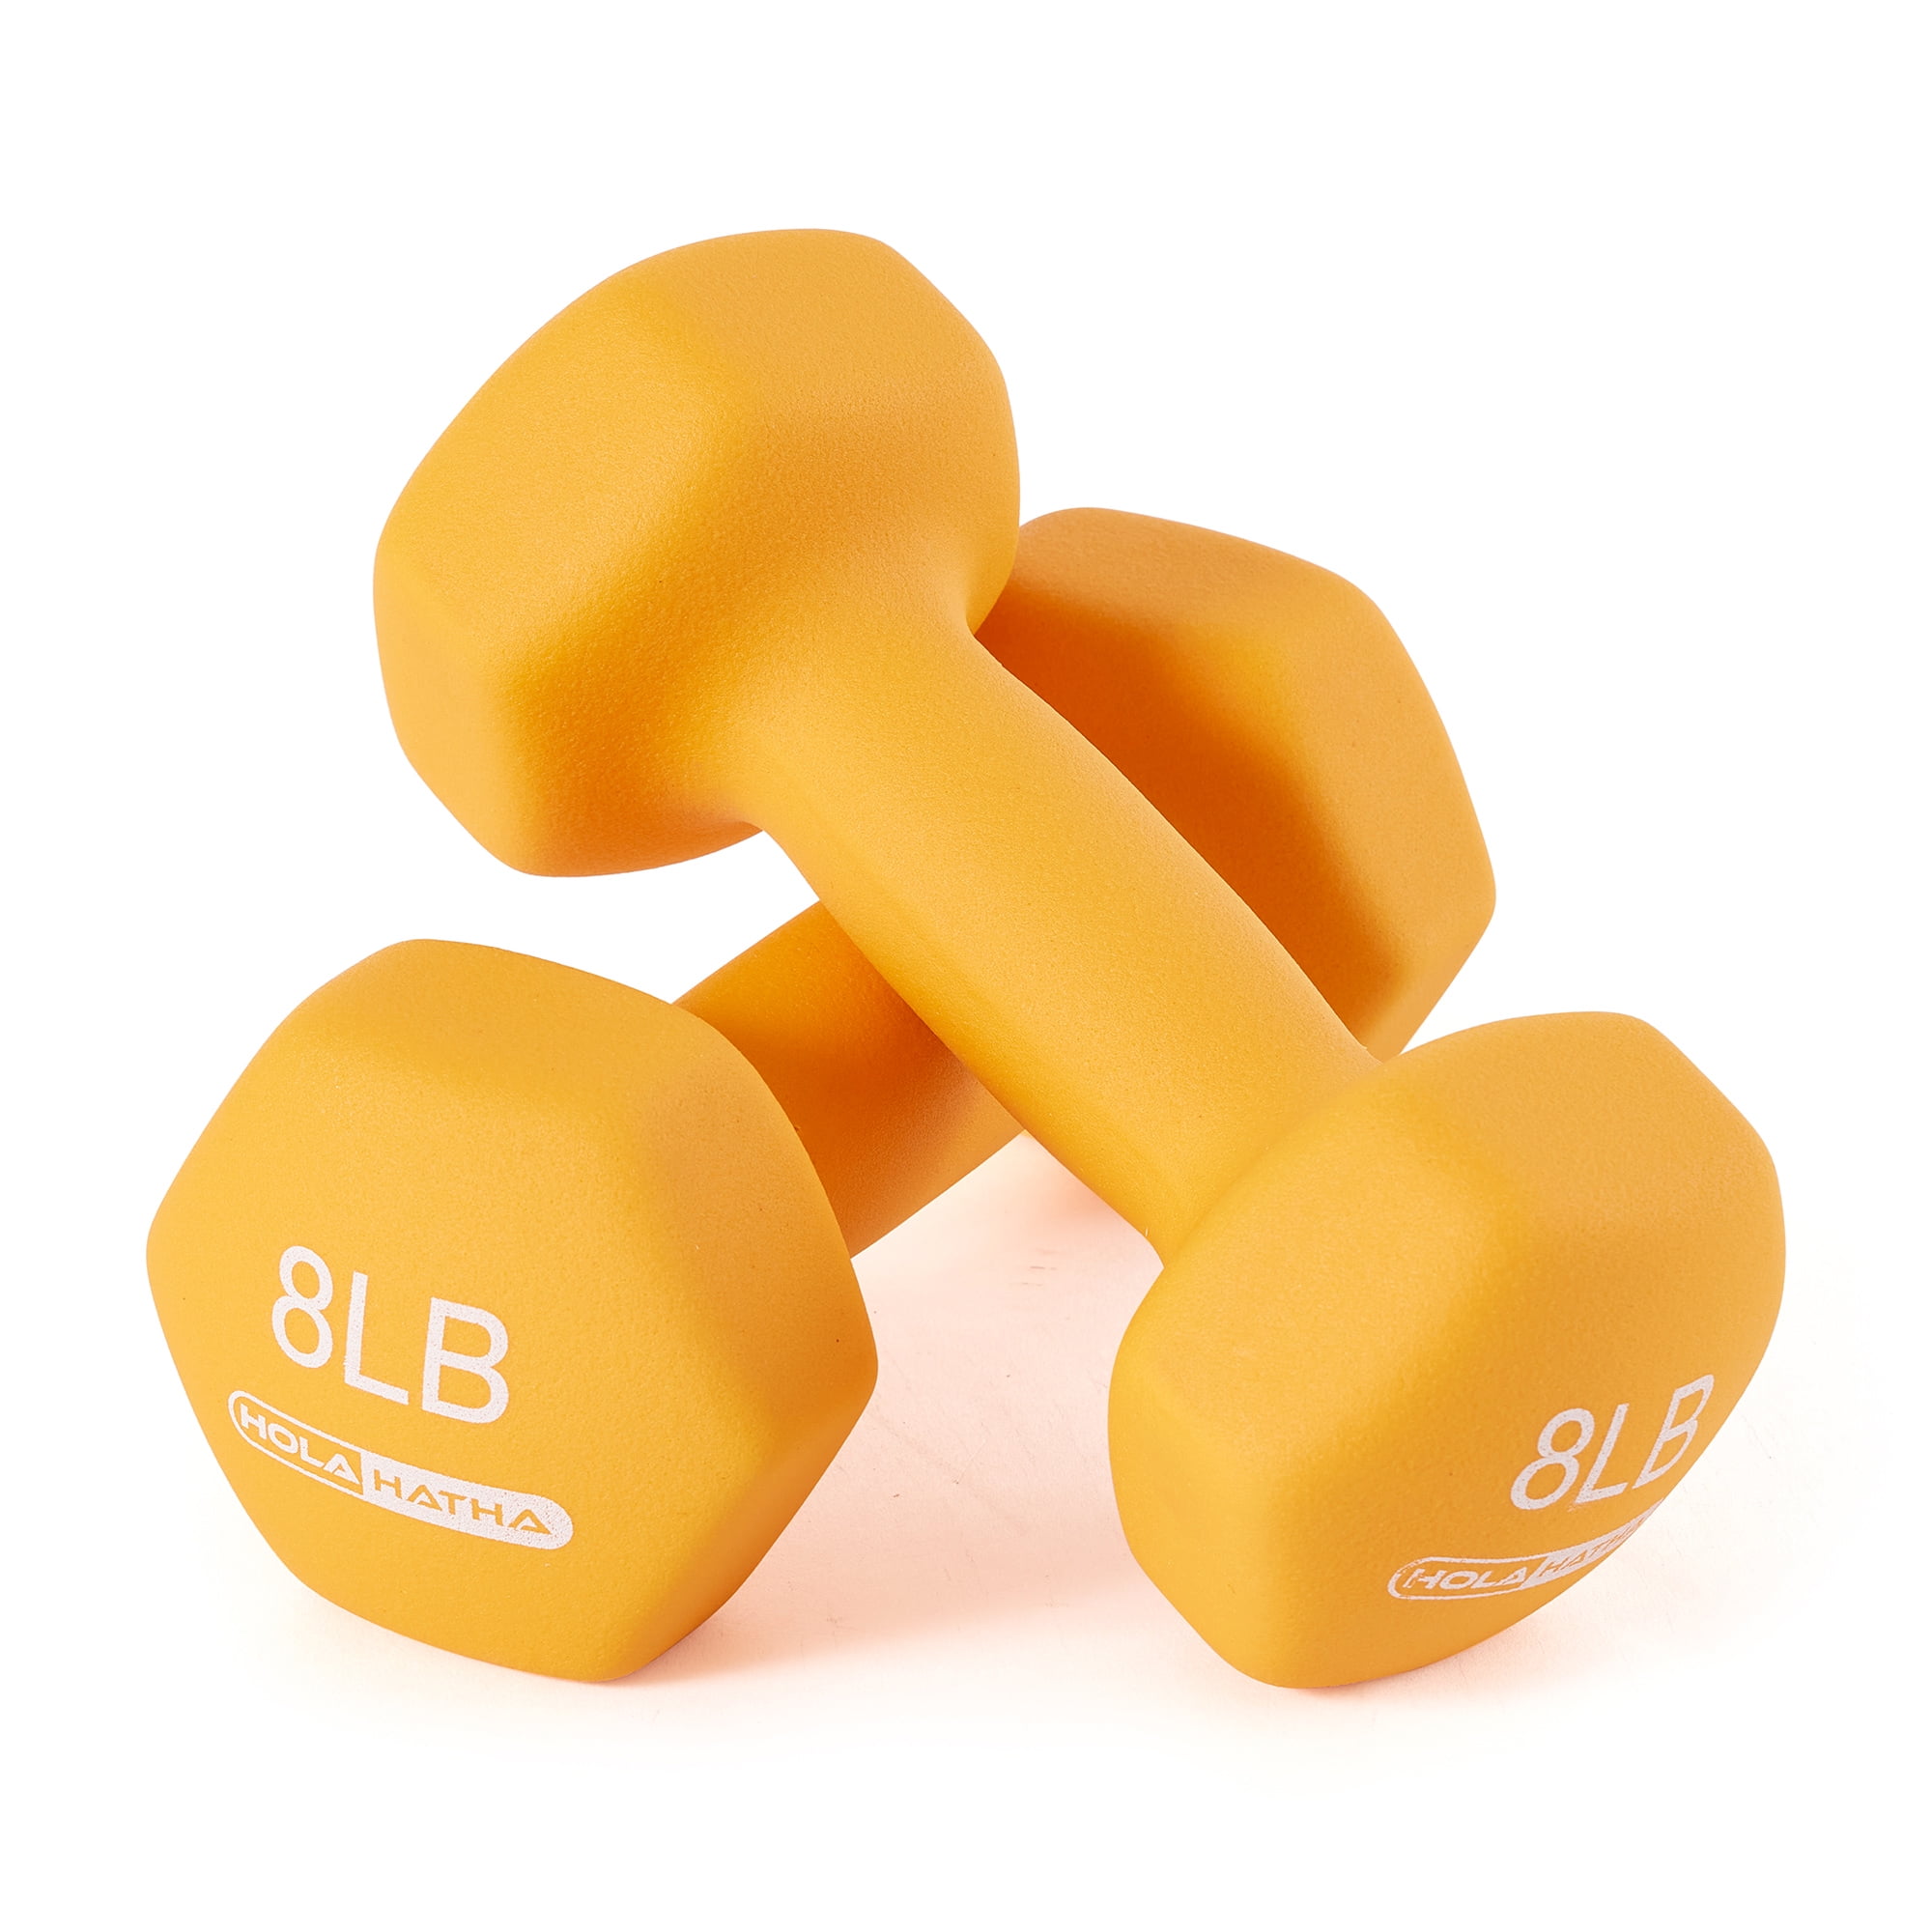 Open Box HolaHatha Dumbbell Weight Set w/ 3, 5 and 8 Pound Weights Storage Rack